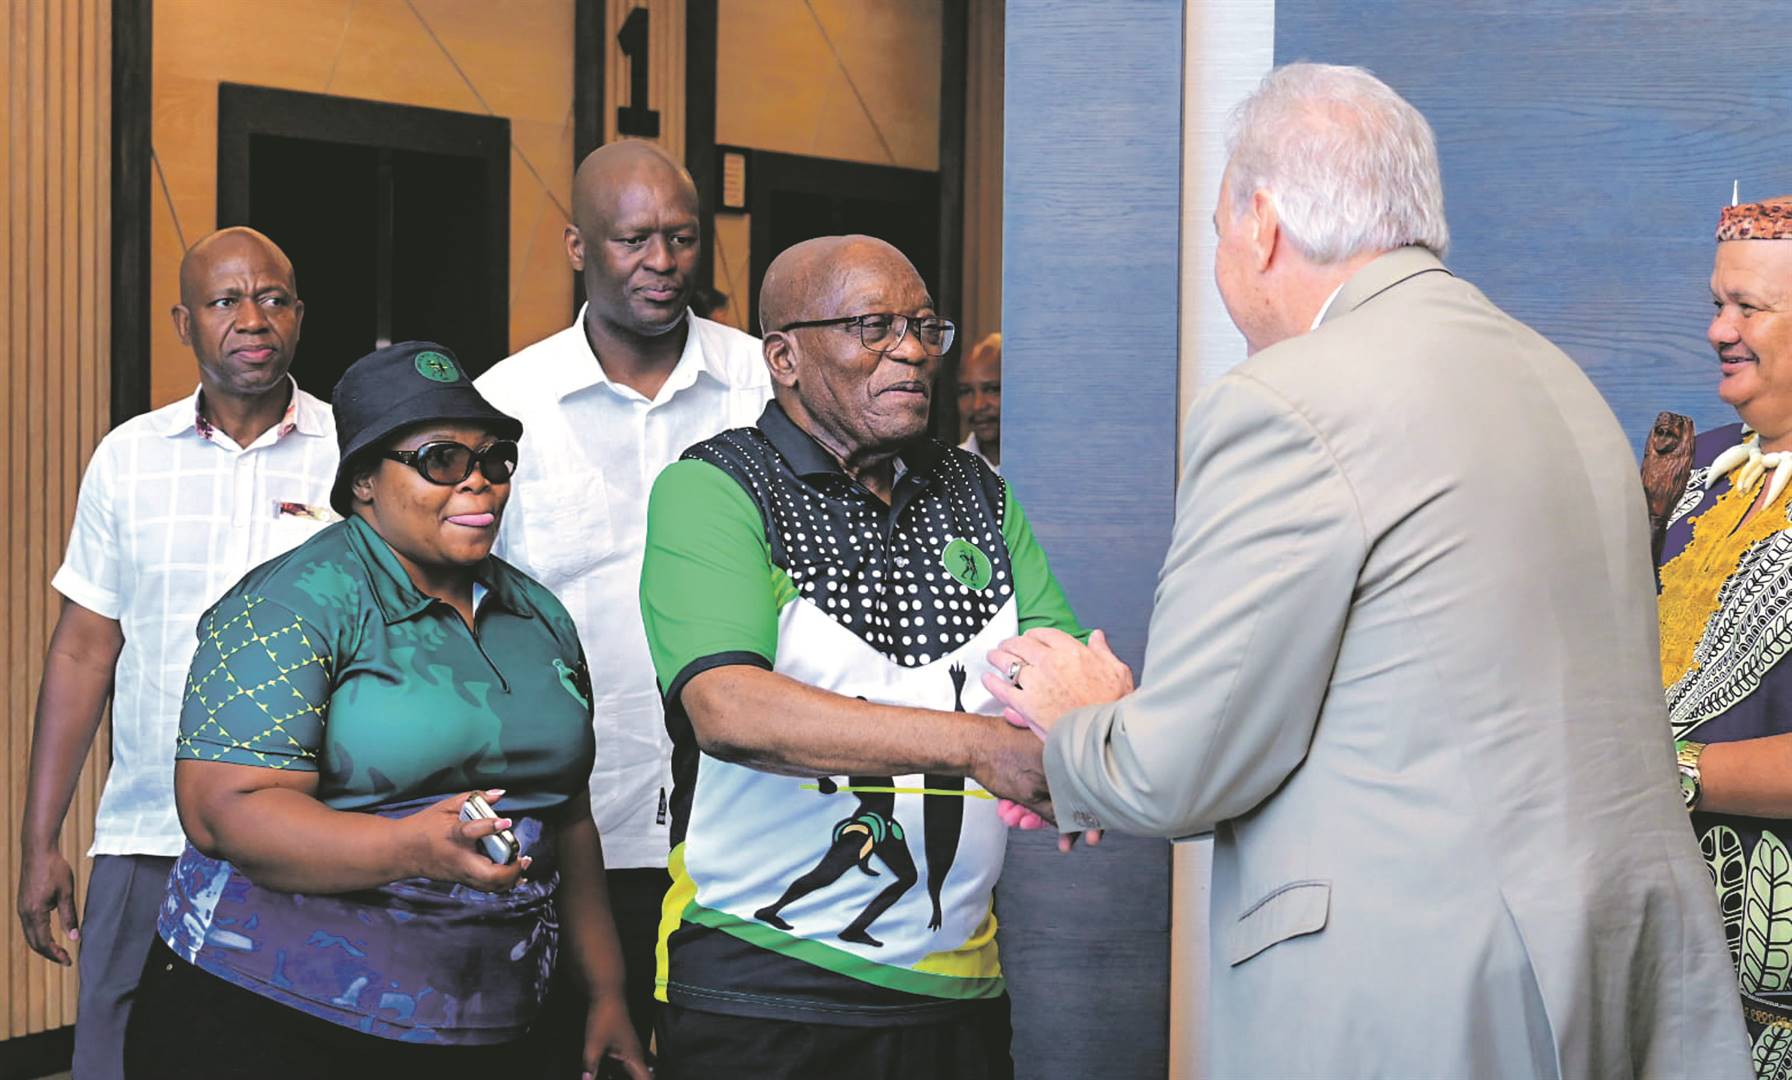 Last week, Zuma addressed a group of mostly Afrikaner businesspeople and even performed his popular song Umshini wami, but was met by silent stares from his audience. 